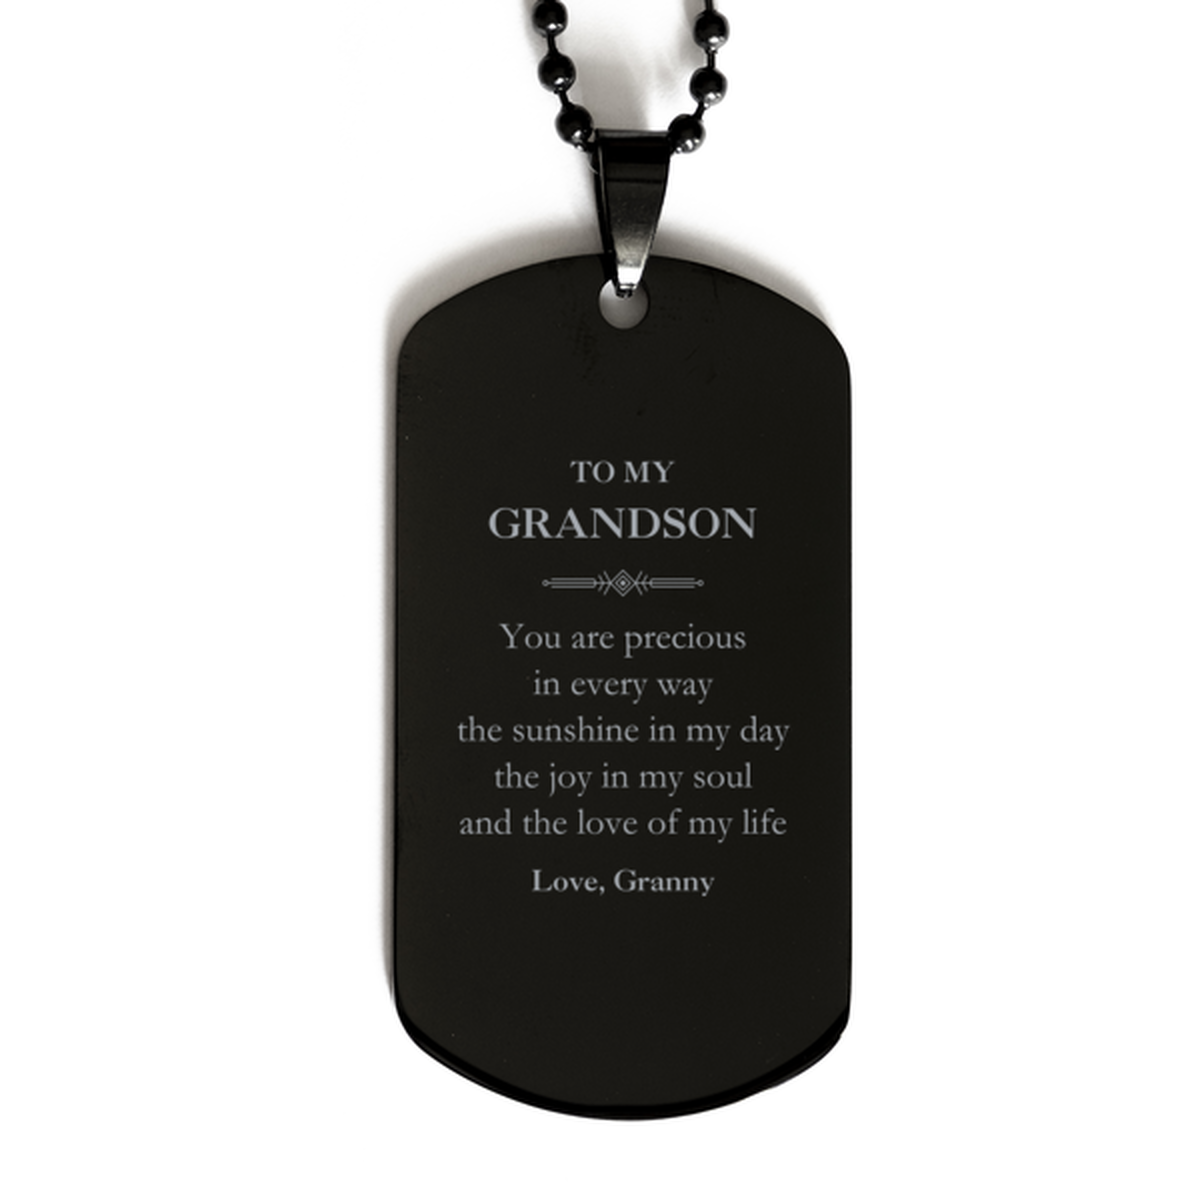 Graduation Gifts for Grandson Black Dog Tag Present from Granny, Christmas Grandson Birthday Gifts Grandson You are precious in every way the sunshine in my day. Love, Granny